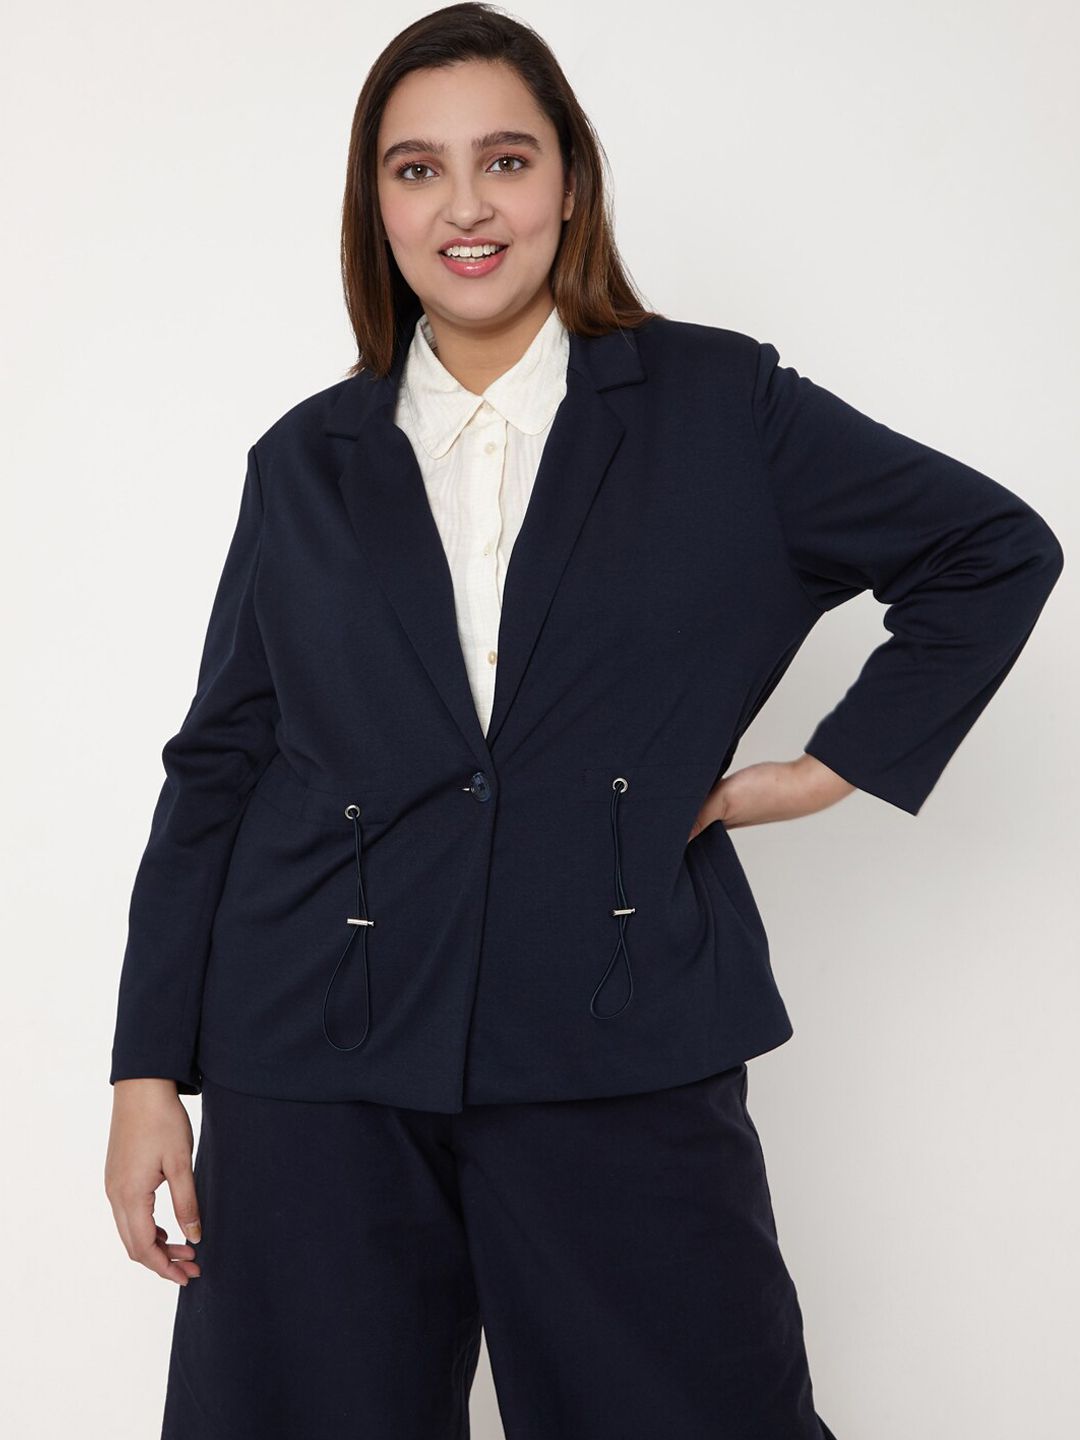 Vero Moda Women Navy Blue Solid Regular-Fit Single-Breasted Casual Blazer Price in India